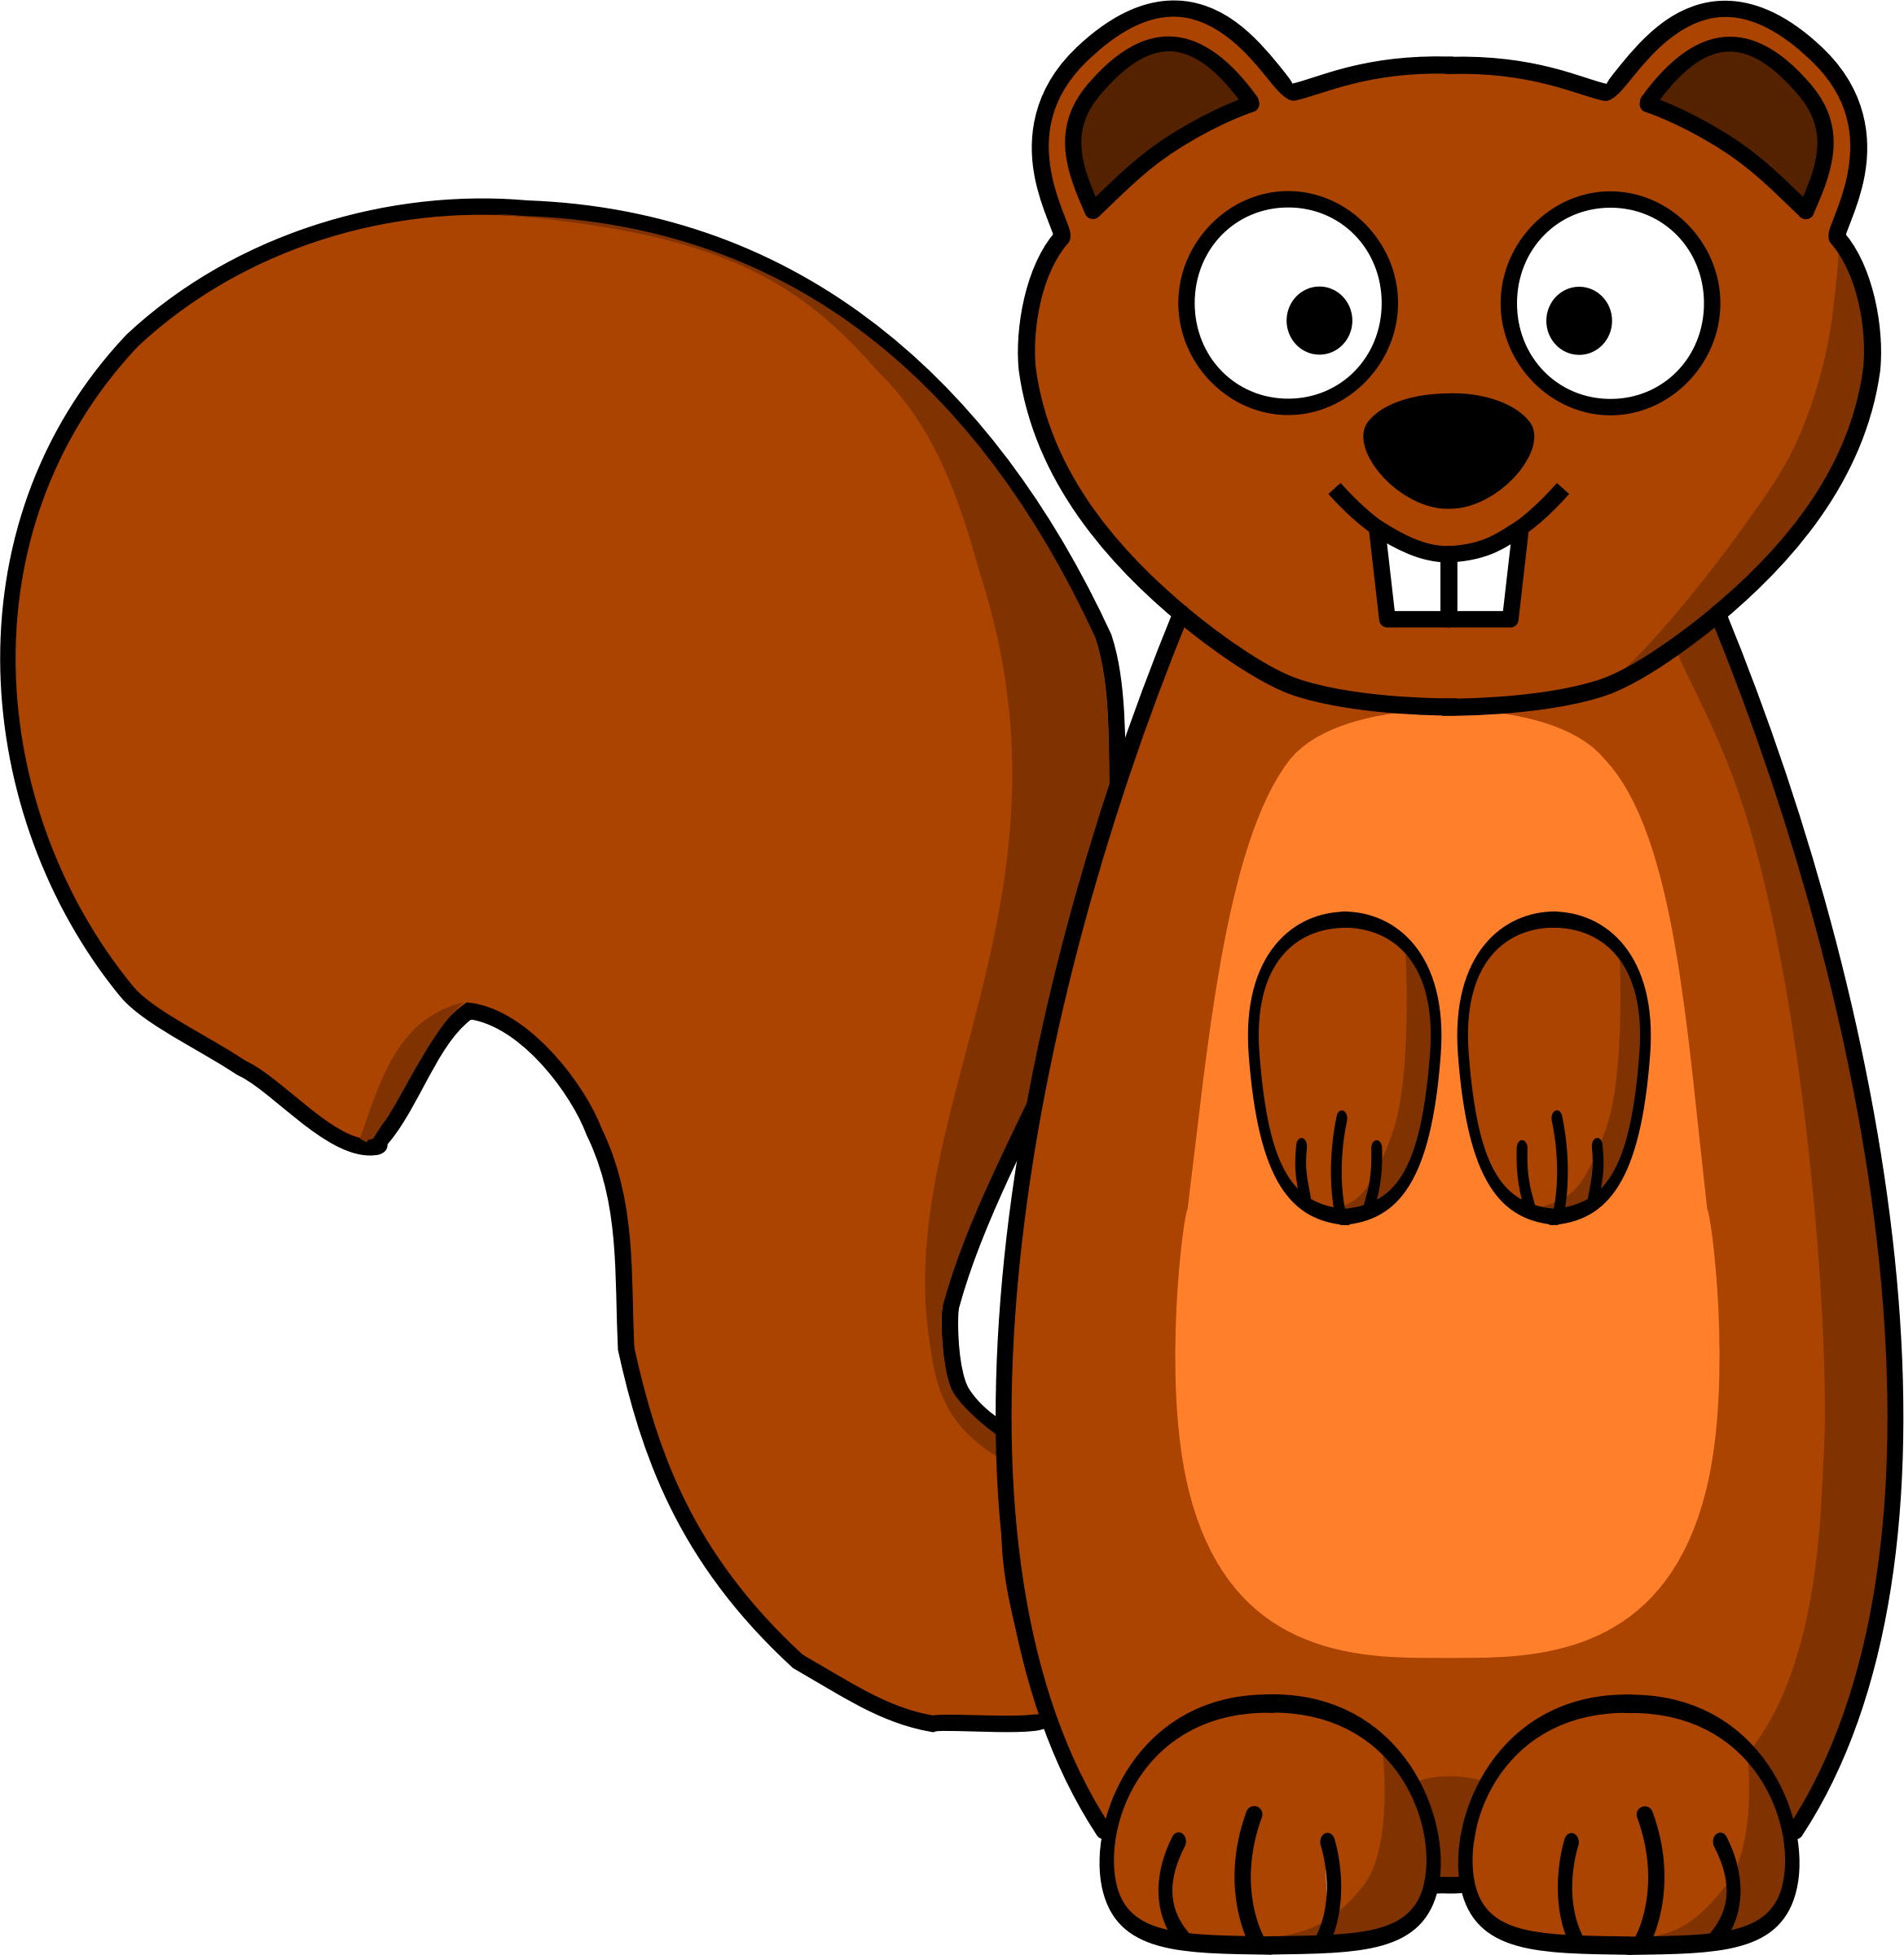 Nuts clipart squirrel, Nuts squirrel Transparent FREE for download on ...